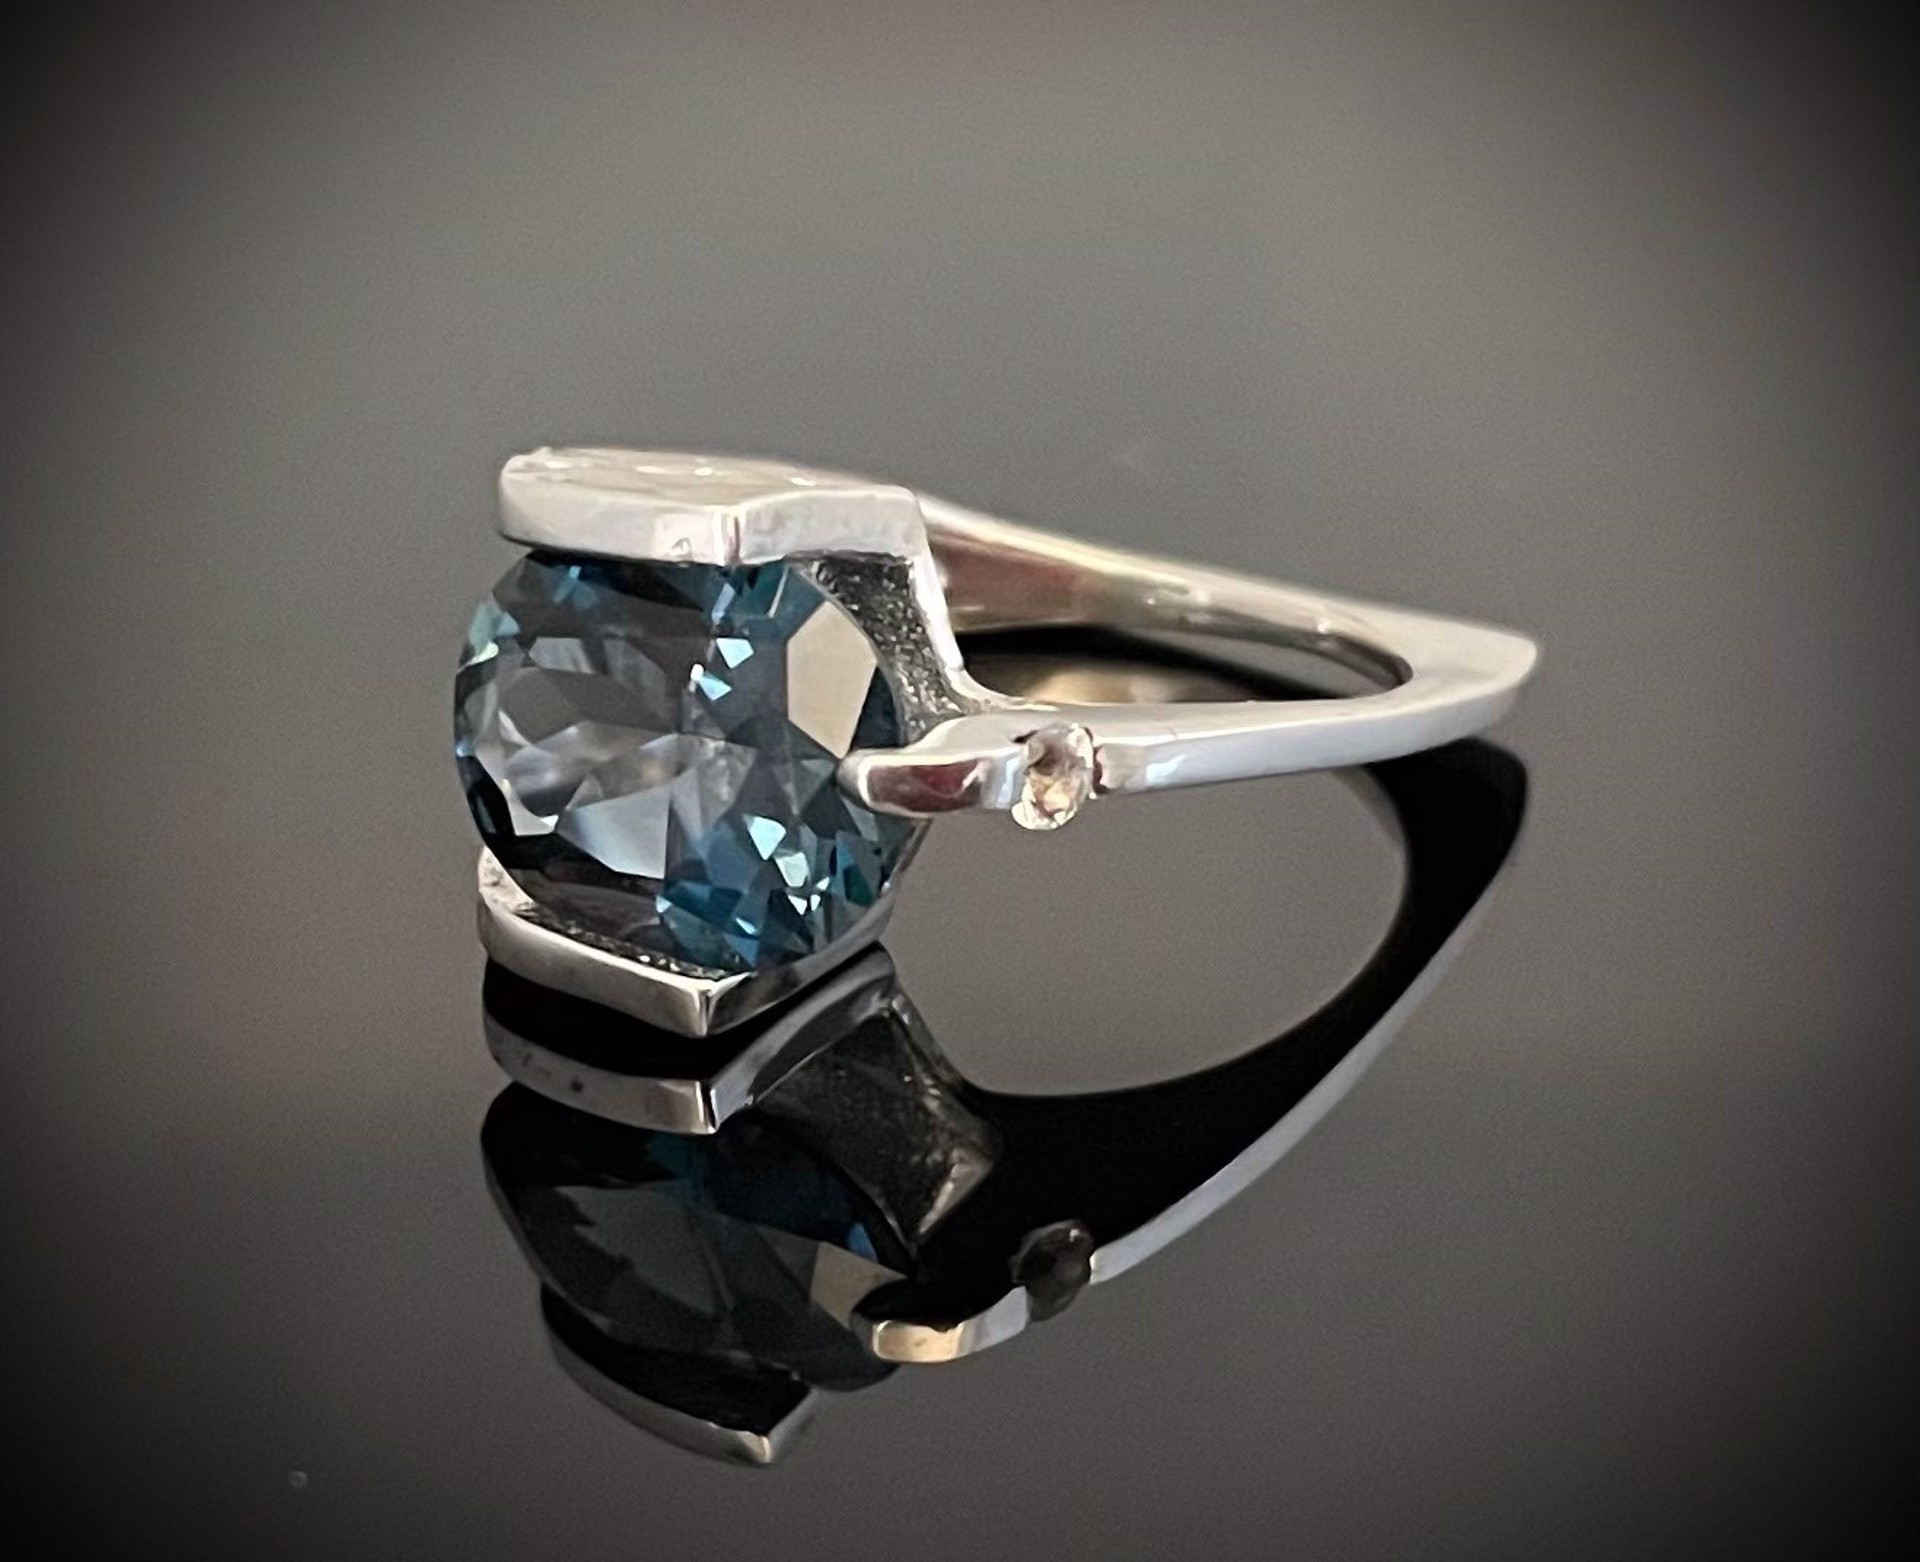 Starry Nights Ring - London Blue Topaz and White Sapphire Stones by Celest Michelotti